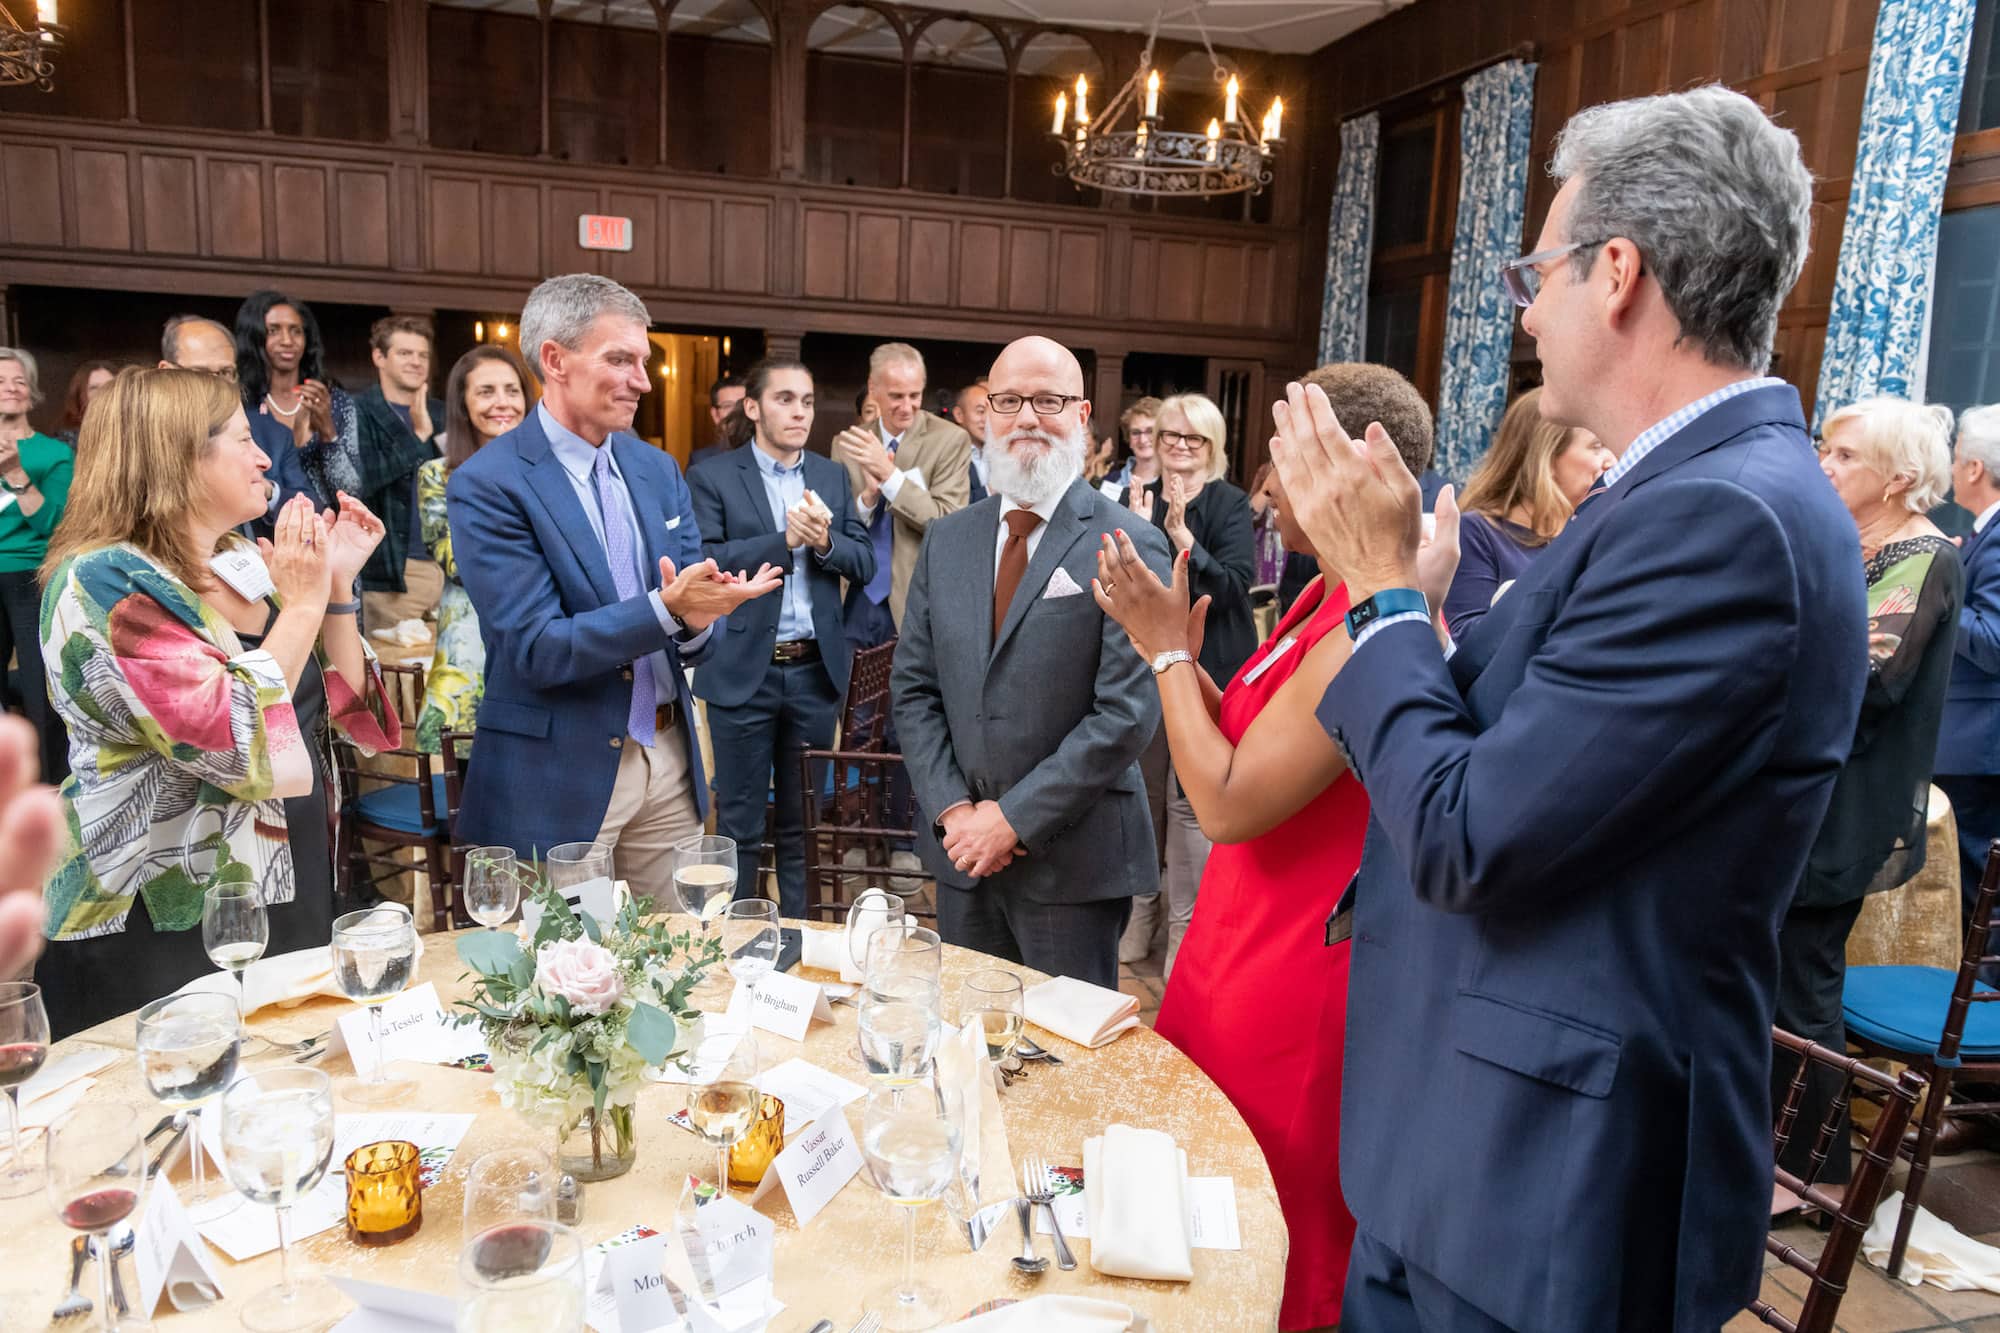 A group of people stand in a wood-paneled dining room applauding Professor Robert Brigham, a person with a bald head and a full white beard and mustache, wearing a suit.